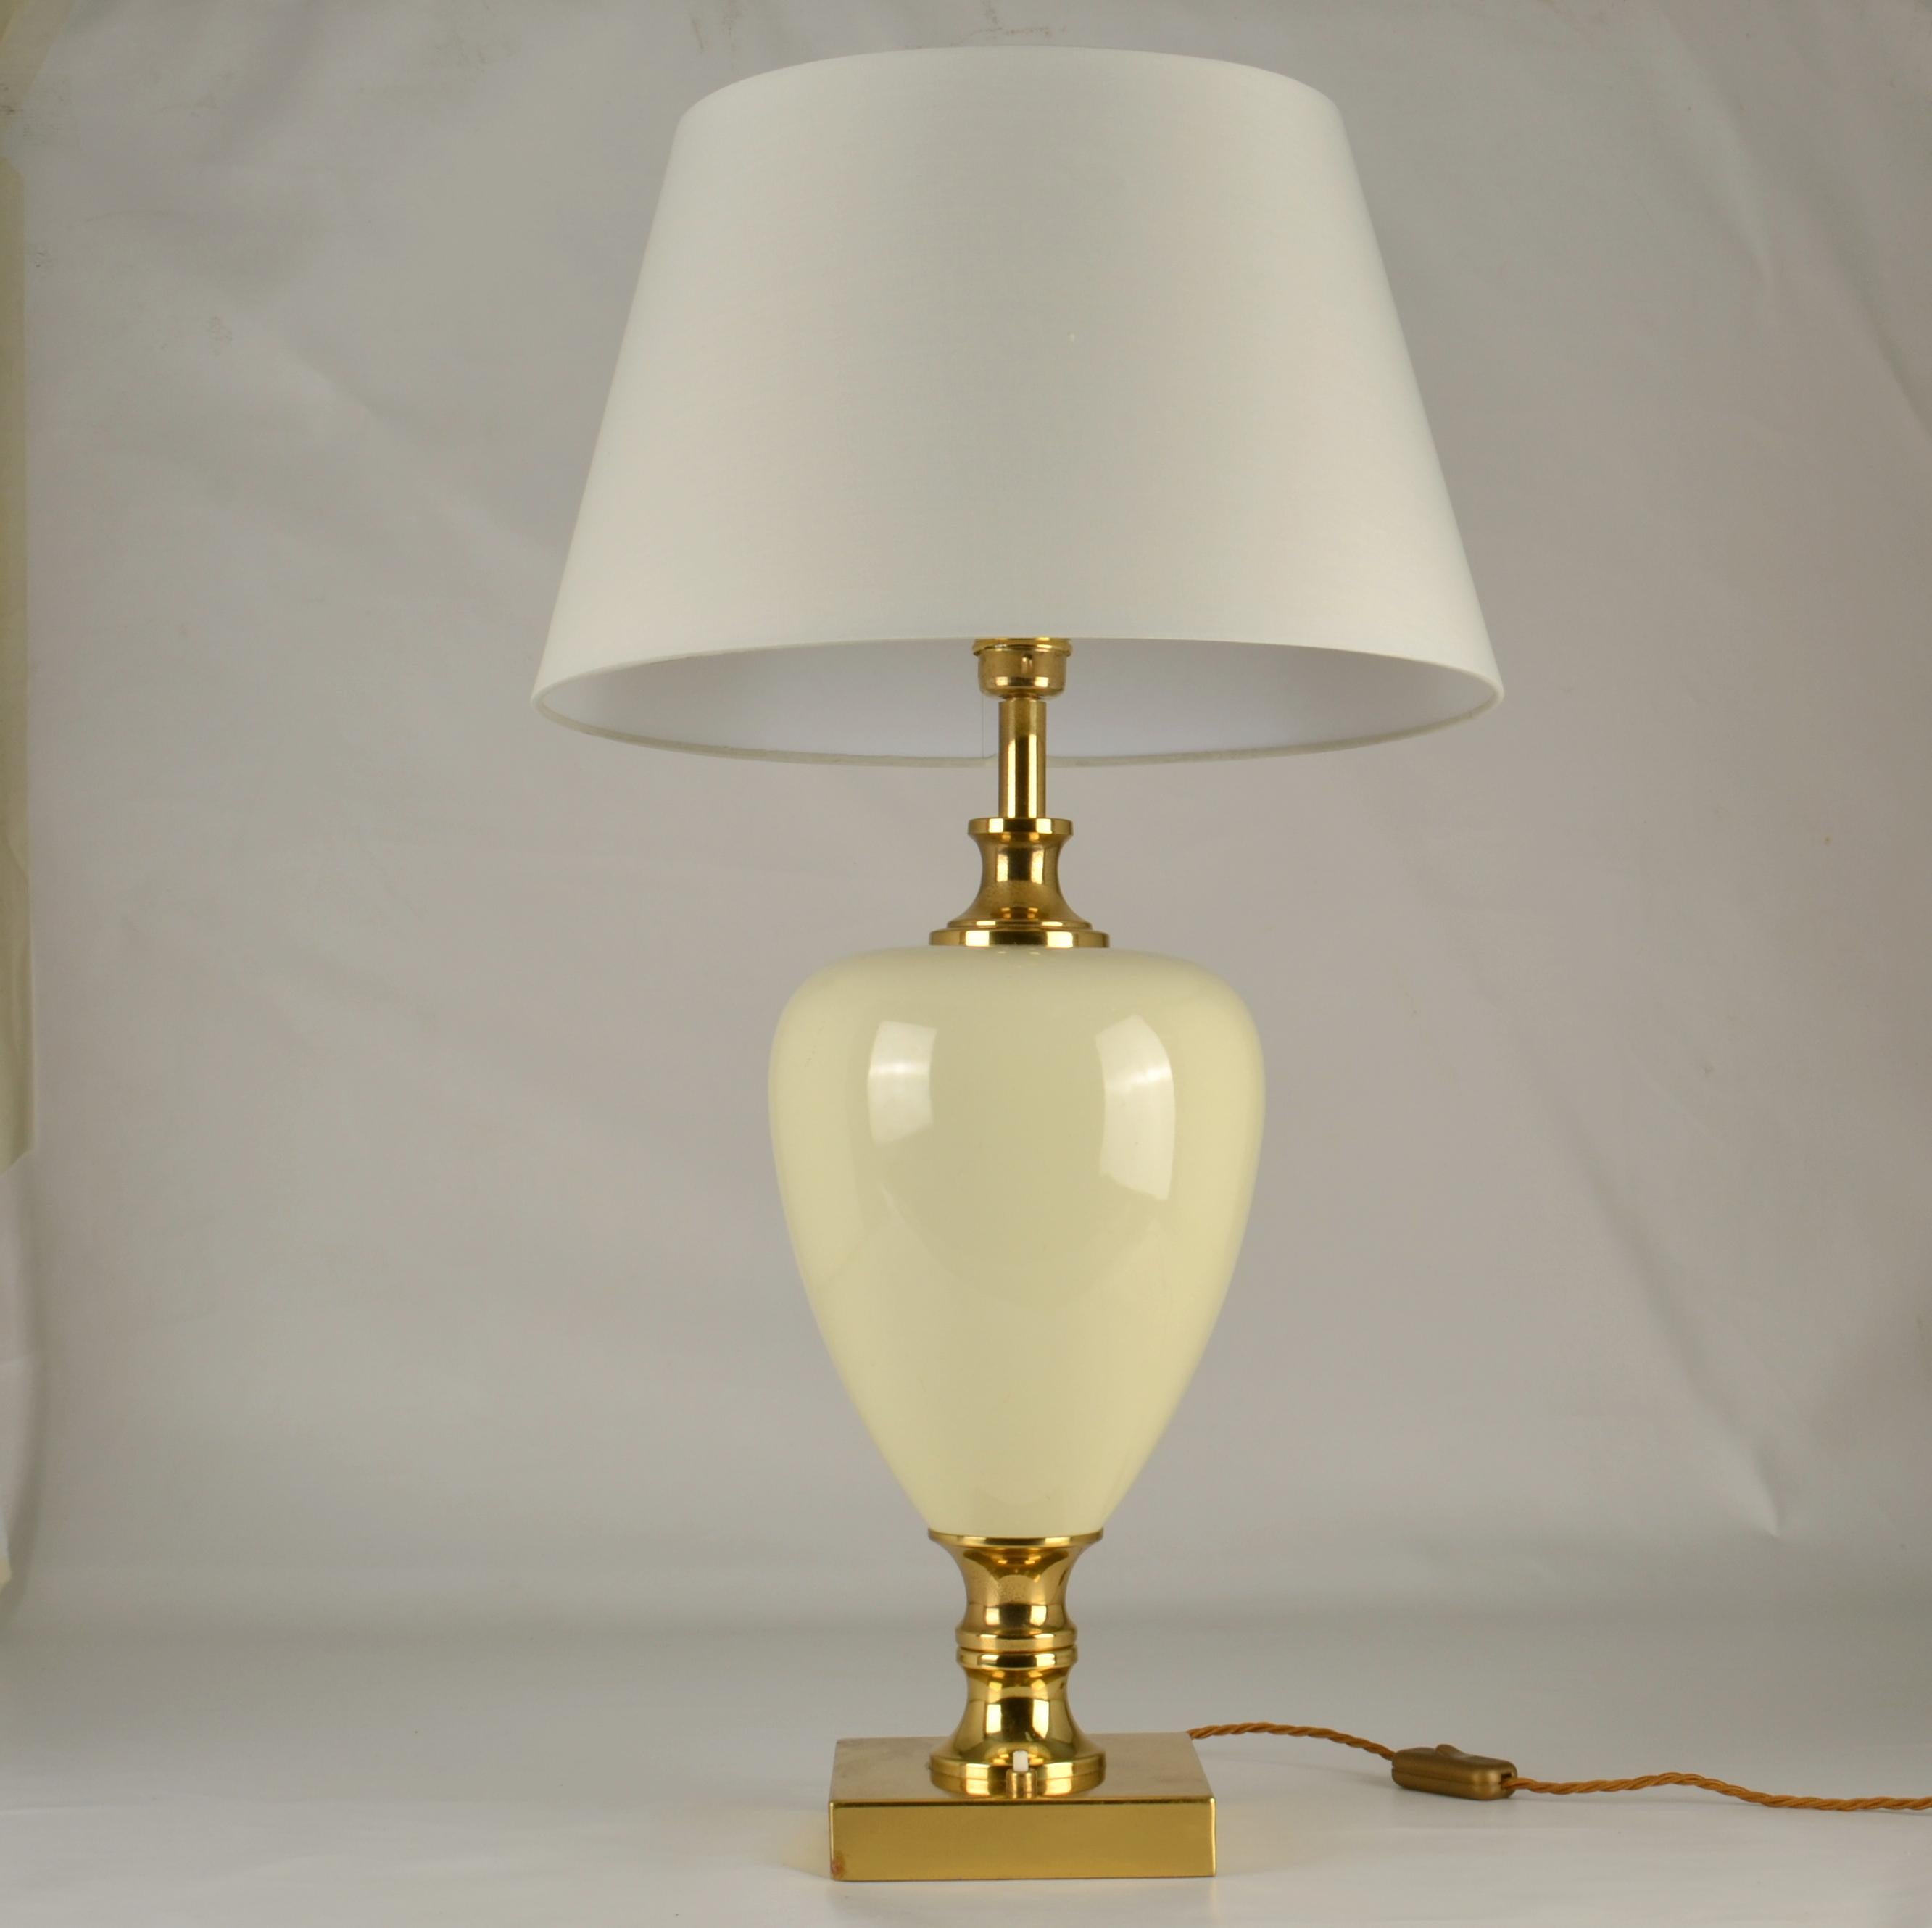 Pair of Cream Porcelain and Brass Table Lamps by Zonca, Italy, 1970s For Sale 1